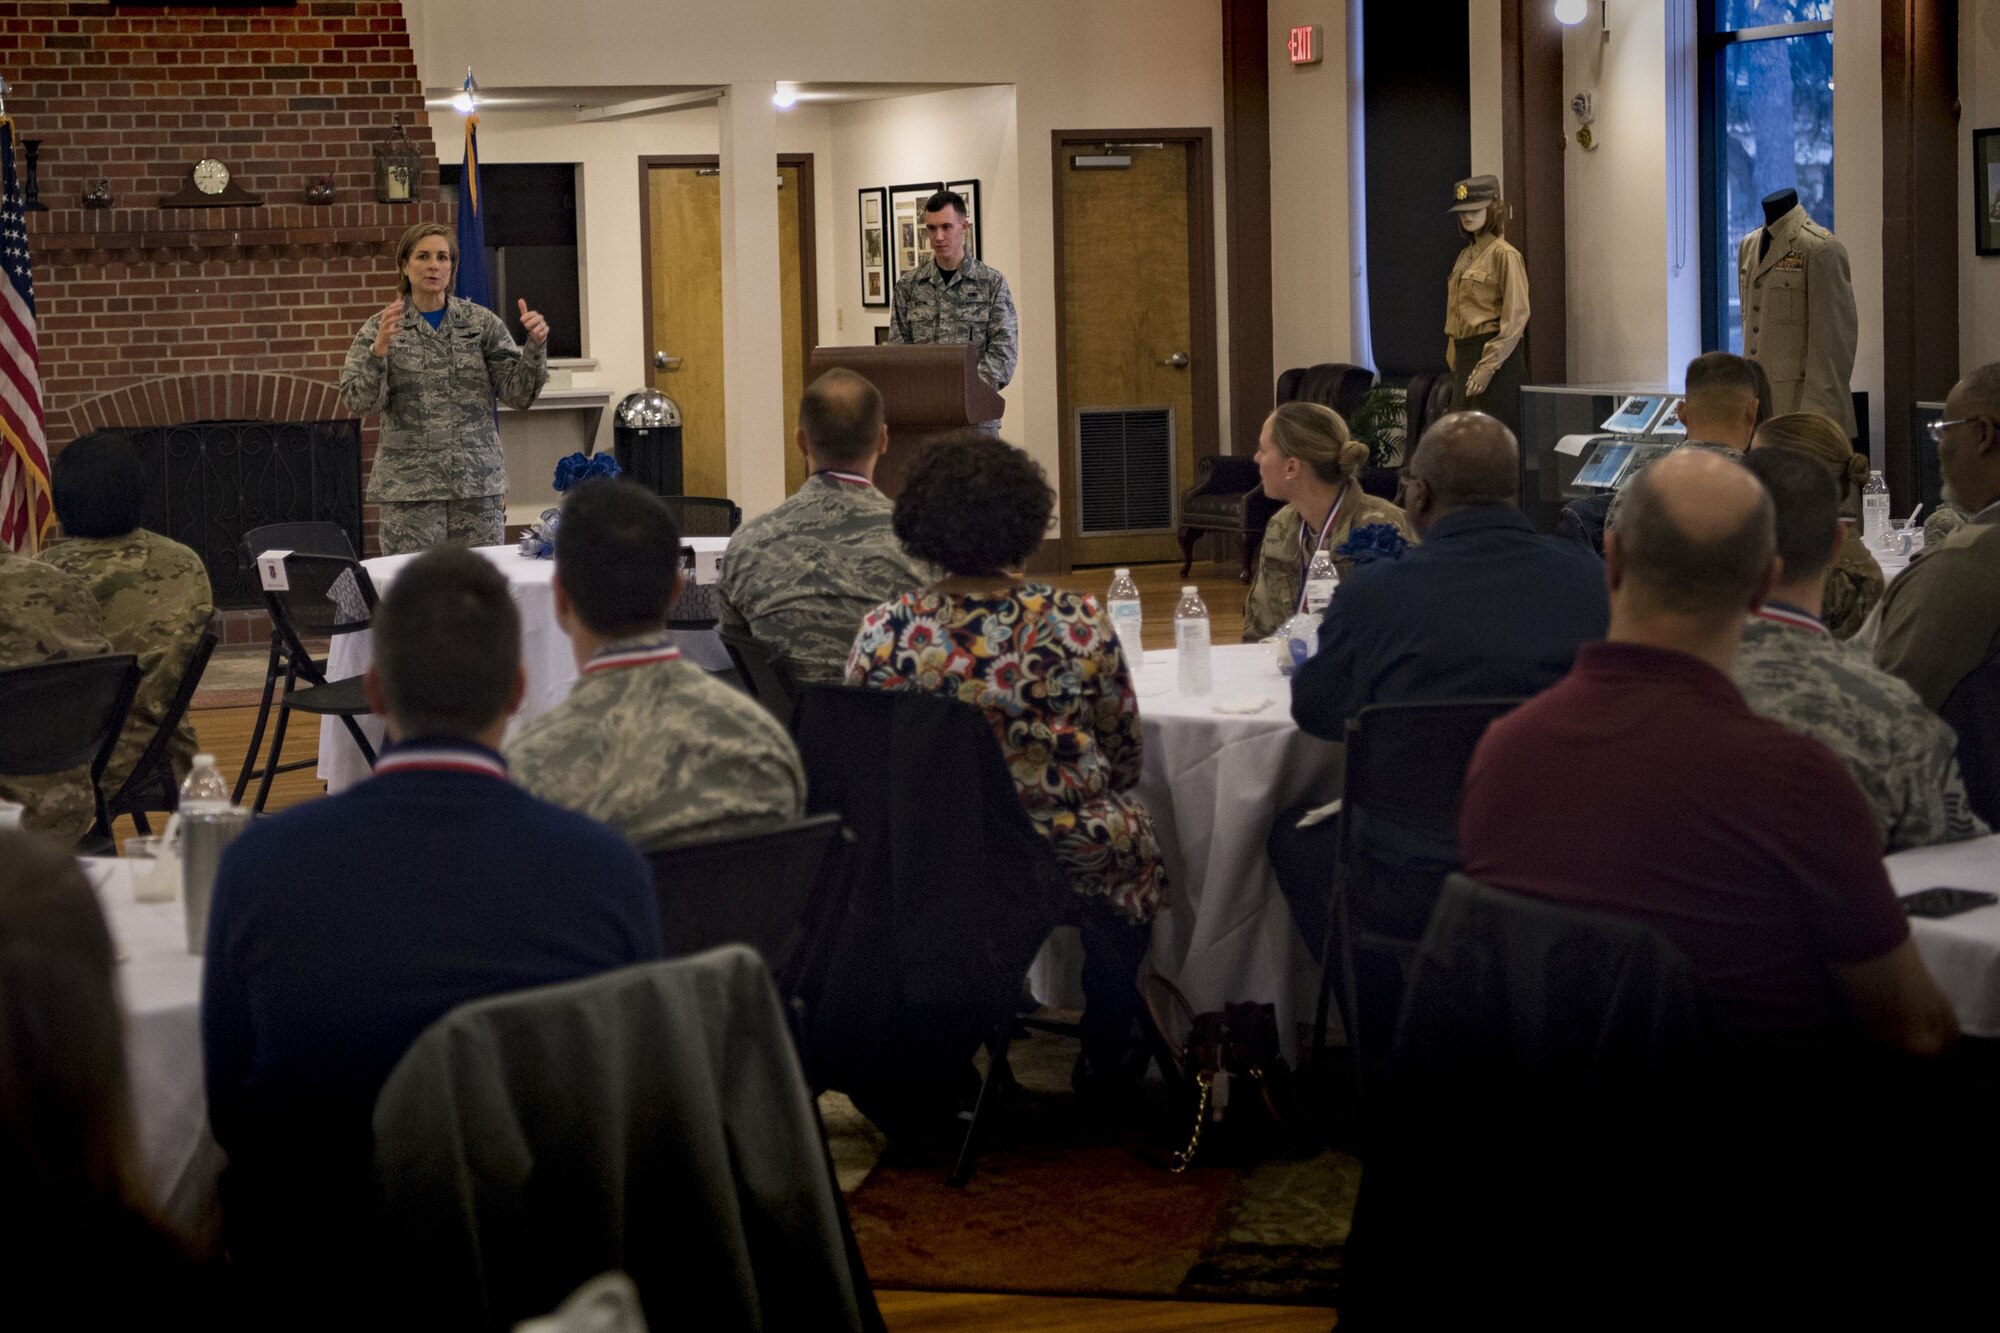 Col. Jennifer Short, 23d Wing commander, addresses a crowd of annual award nominees before a Tour of Champions, Feb. 2, 2018, at Moody Air Force Base, Ga. The Tour of Champions recognizes 23d Wing annual award nominees and an opportunity to gain a better perspective of the 23d Wing’s mission. (U.S. Air Force photo by Senior Airman Daniel Snider)